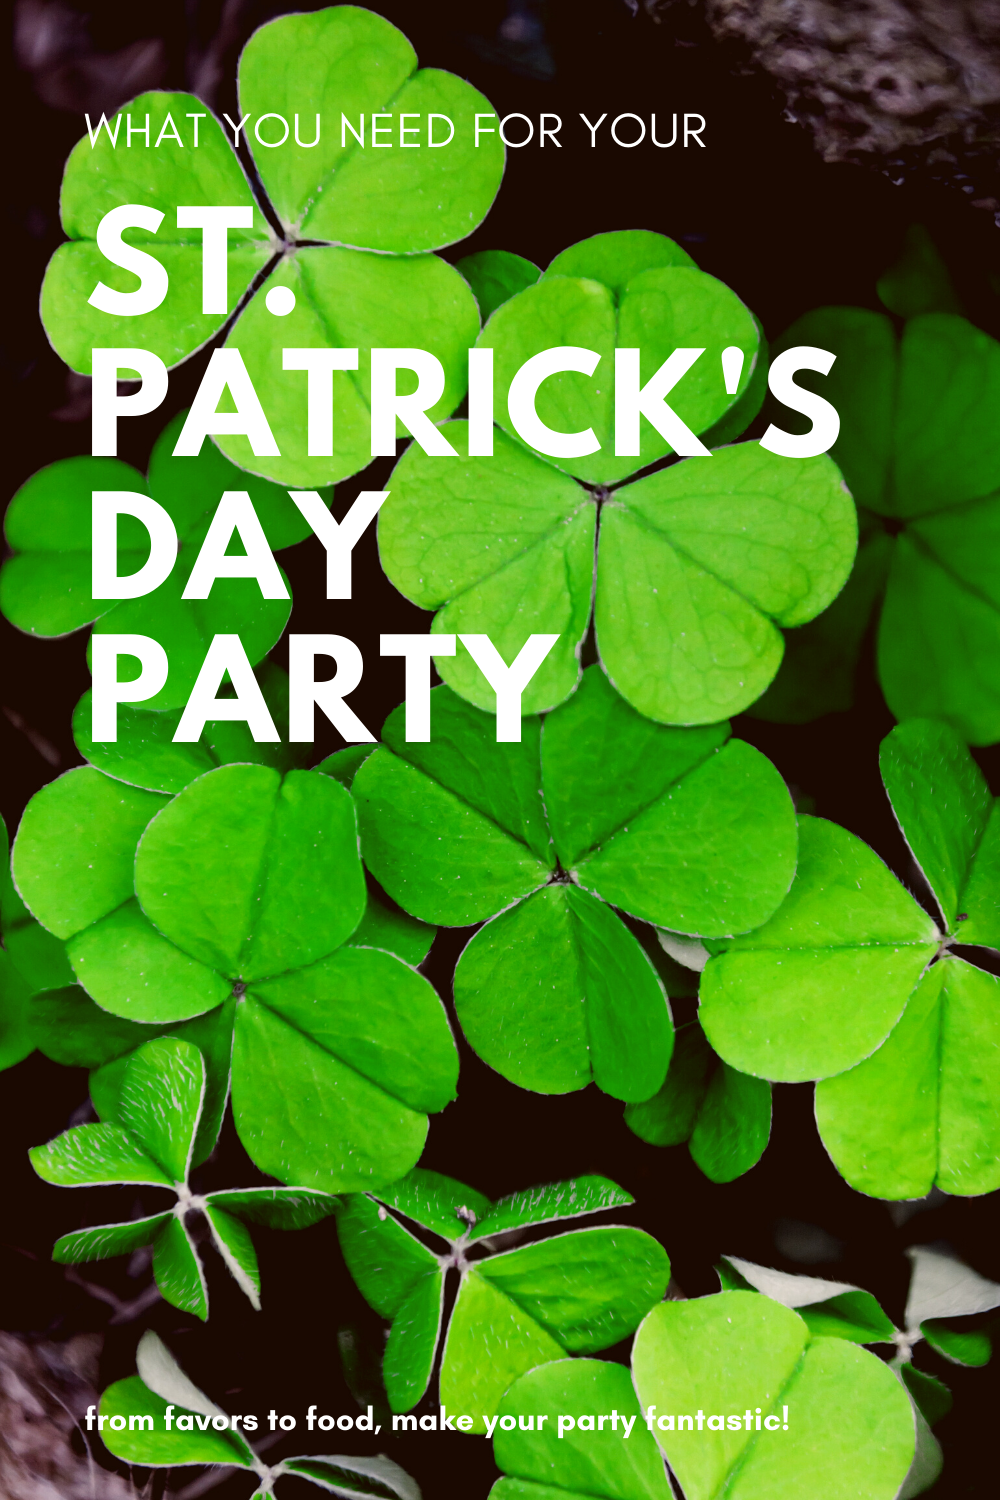 What You Need for Your St. Patrick's Day Party